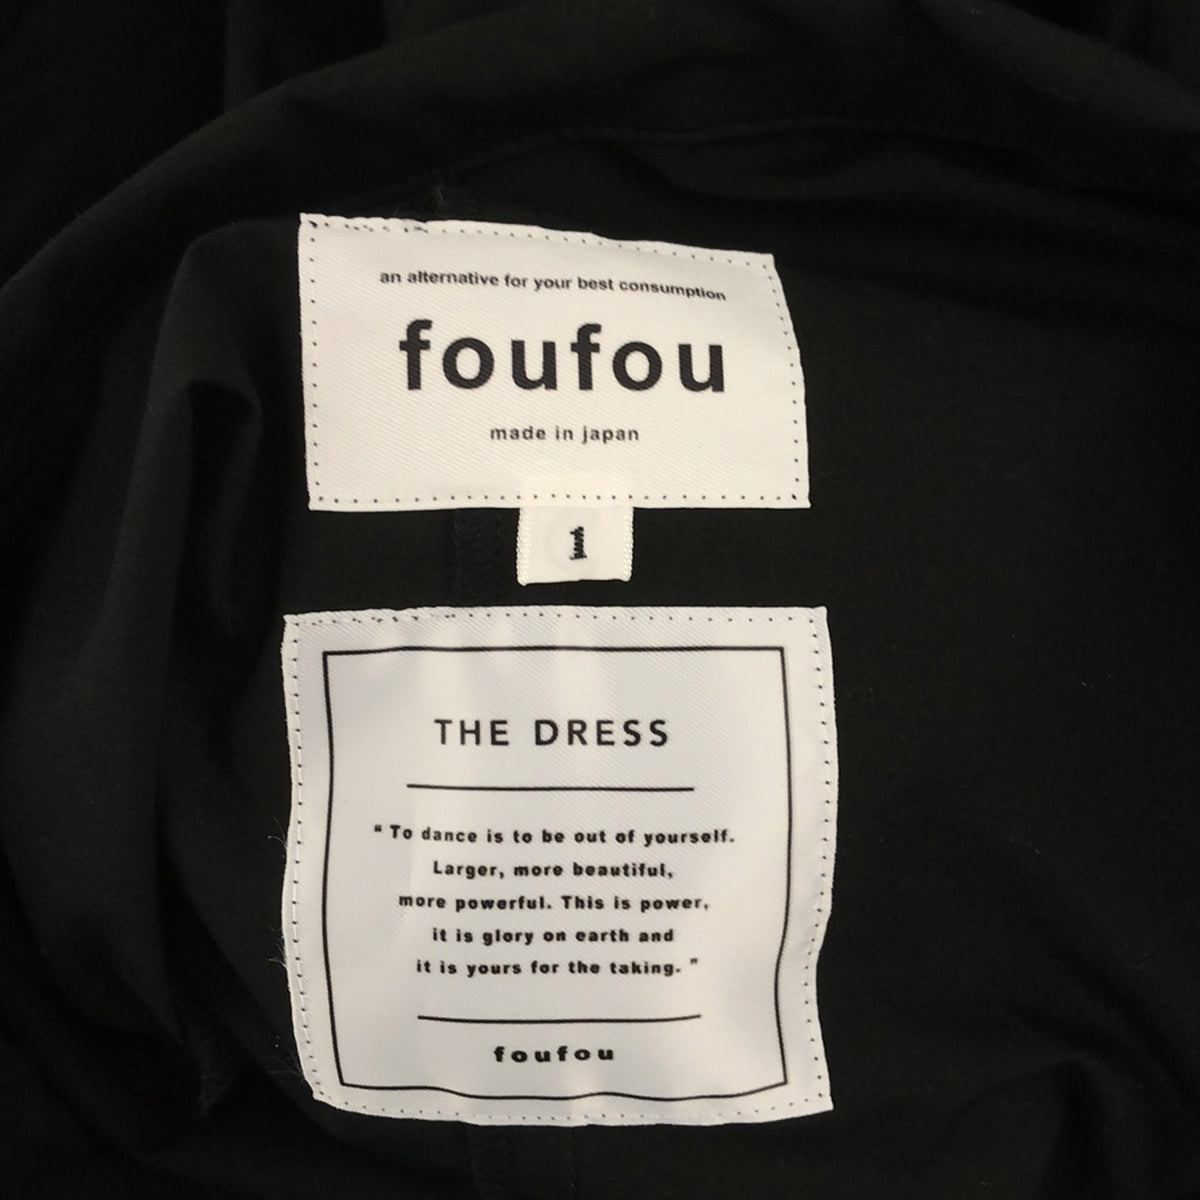 foufou / フーフー | 【THE DRESS #01】rendezvous shirts one piece ランデブーシャツワンピース | 1 | レディース